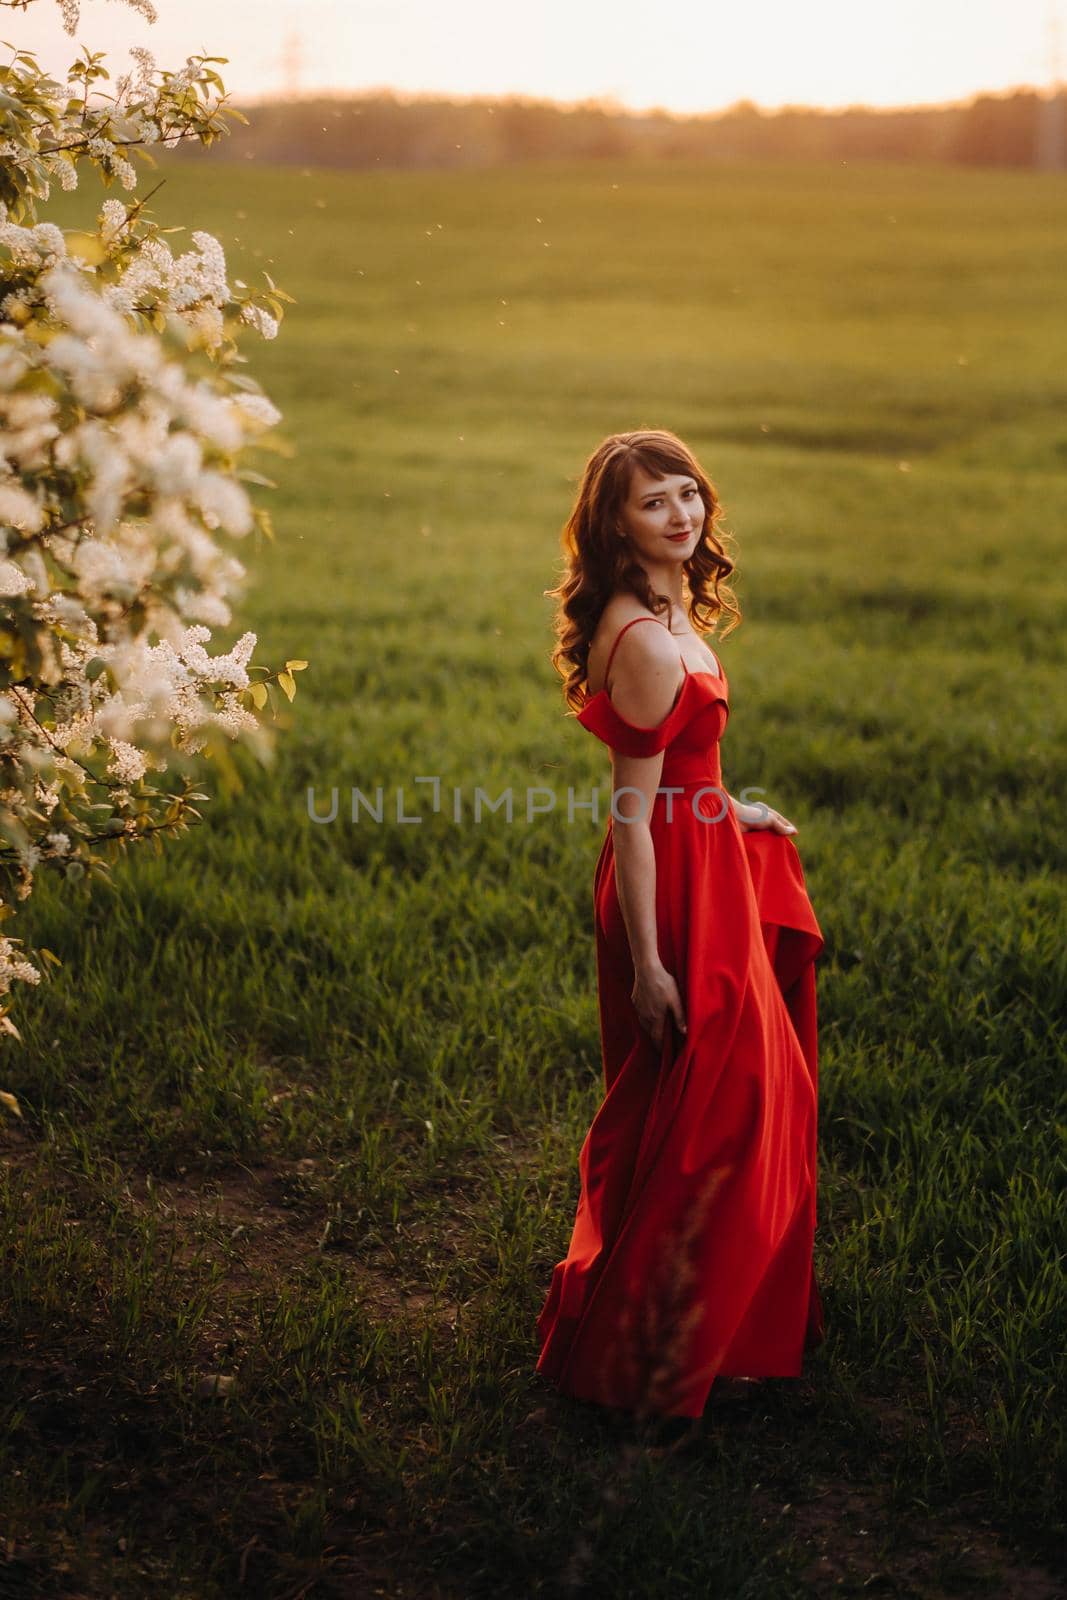 a girl in a red dress with red lips stands next to a large white flowering tree At sunset.